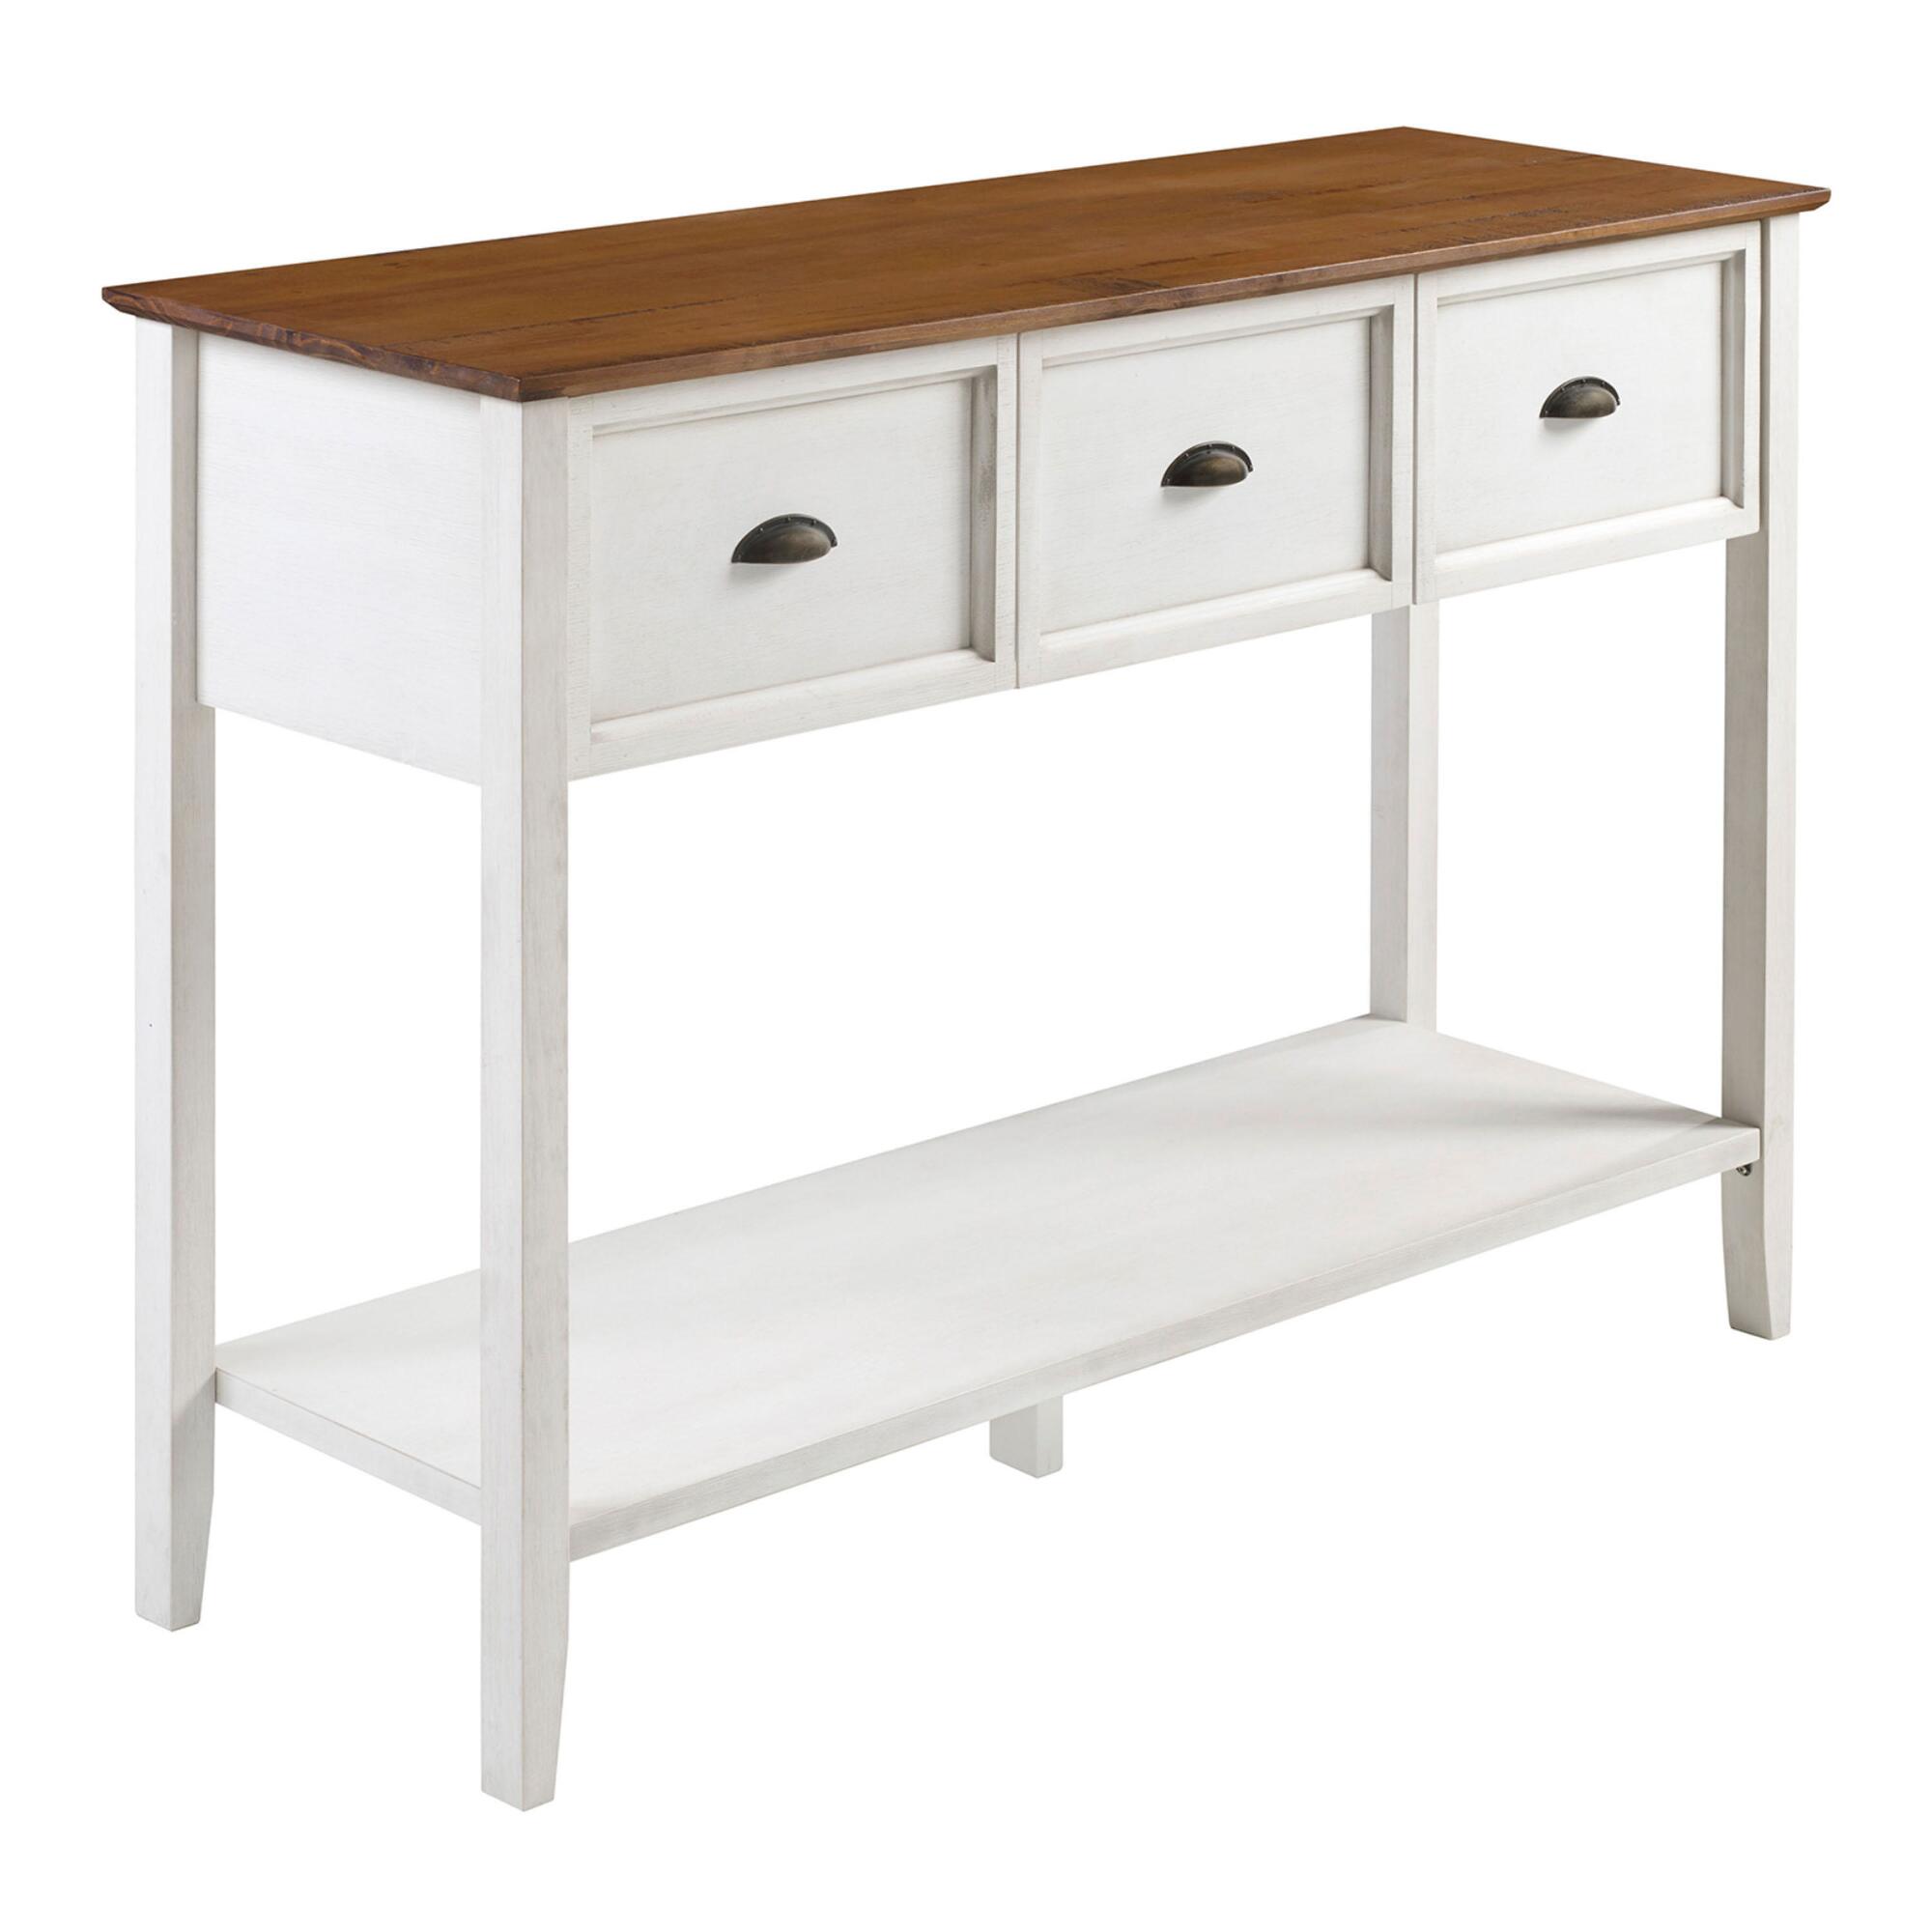 Pine Wood 3 Drawer Clanton Buffet Table: Gray by World Market